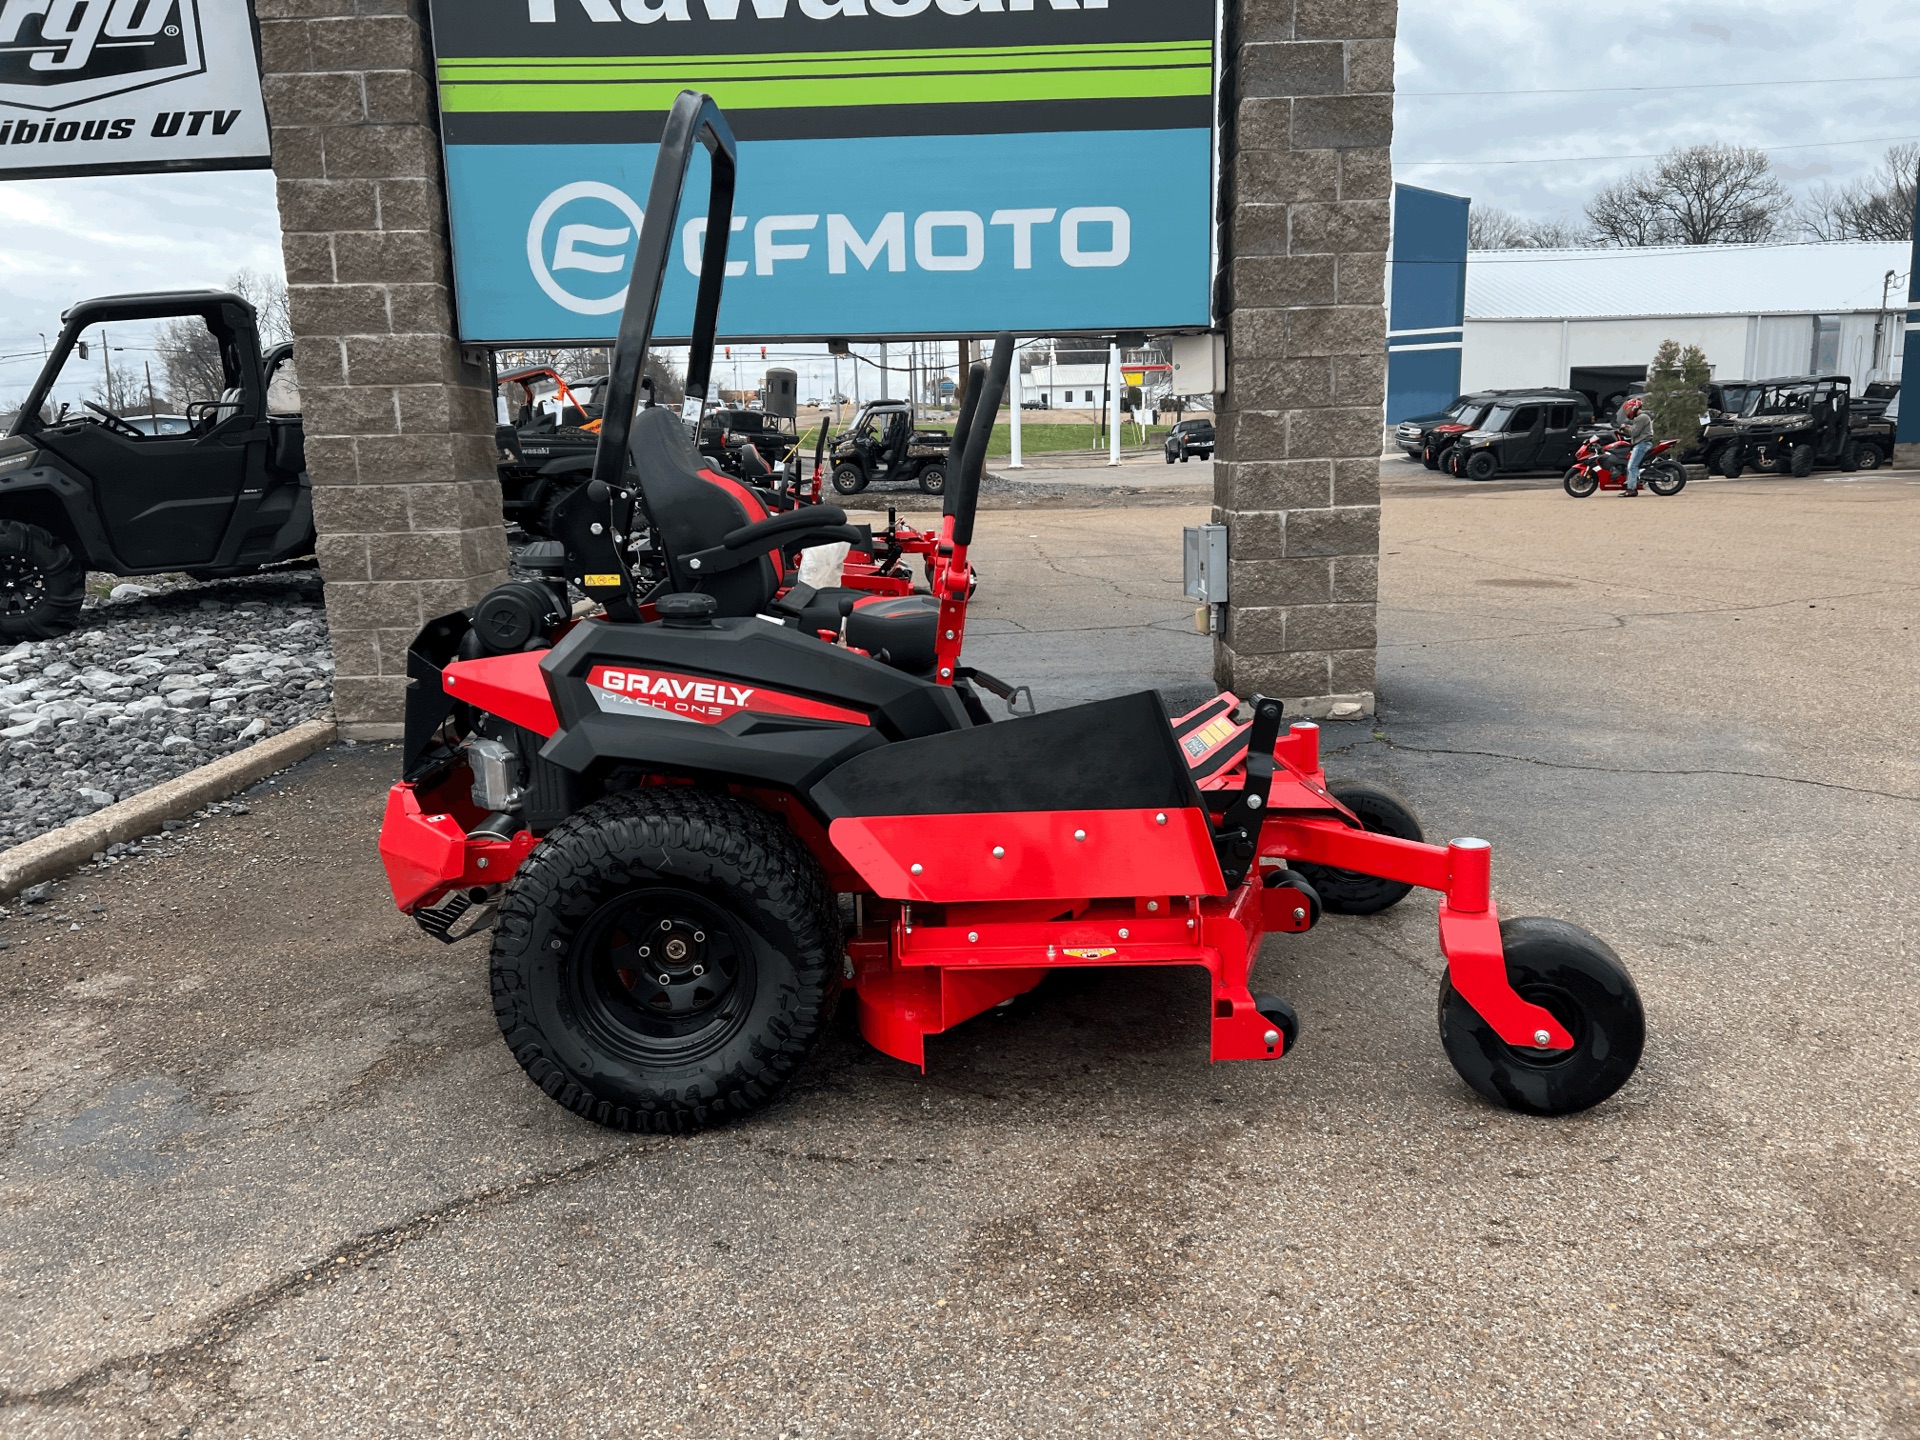 2023 Gravely USA Pro-Turn Mach One 60 in. Kawasaki FX921V 31 hp in Dyersburg, Tennessee - Photo 2